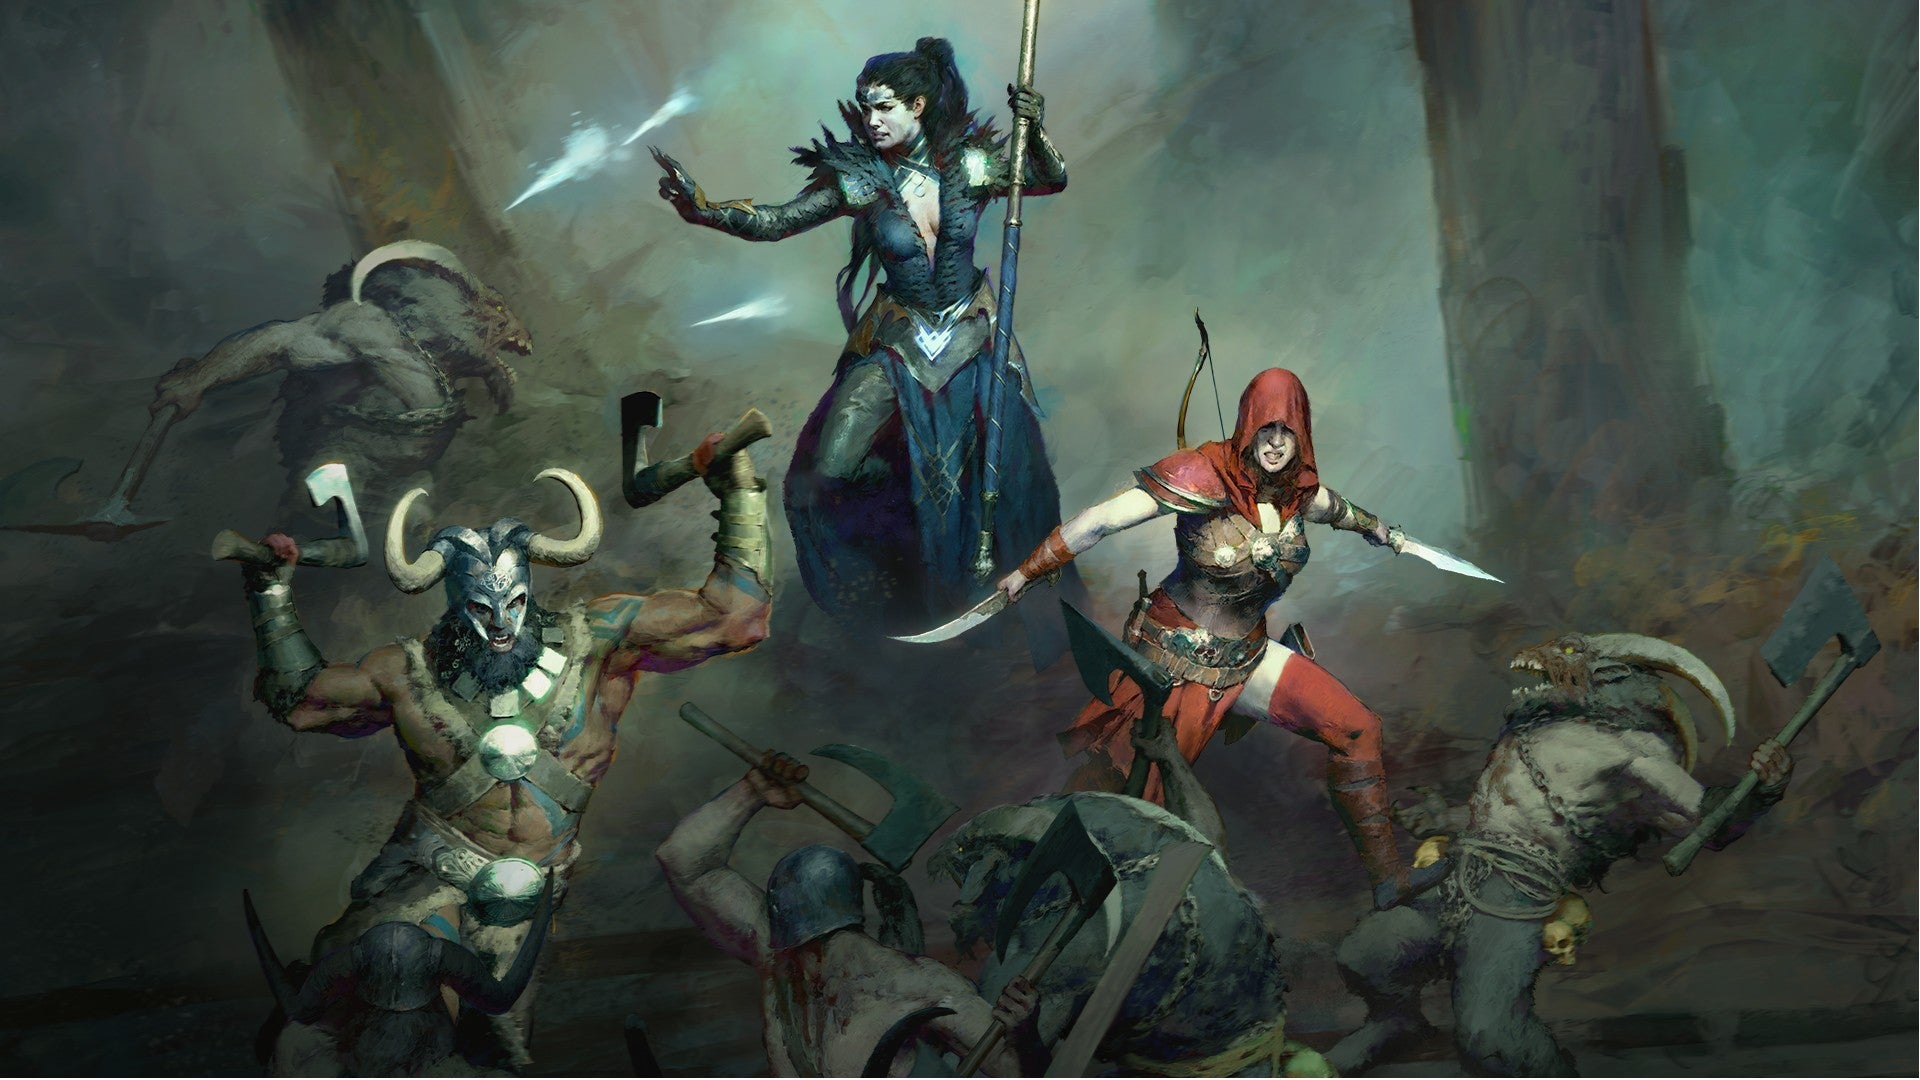 Diablo 4 art showing a Sorcerer, Barbarian, and Rogue fighting demons.